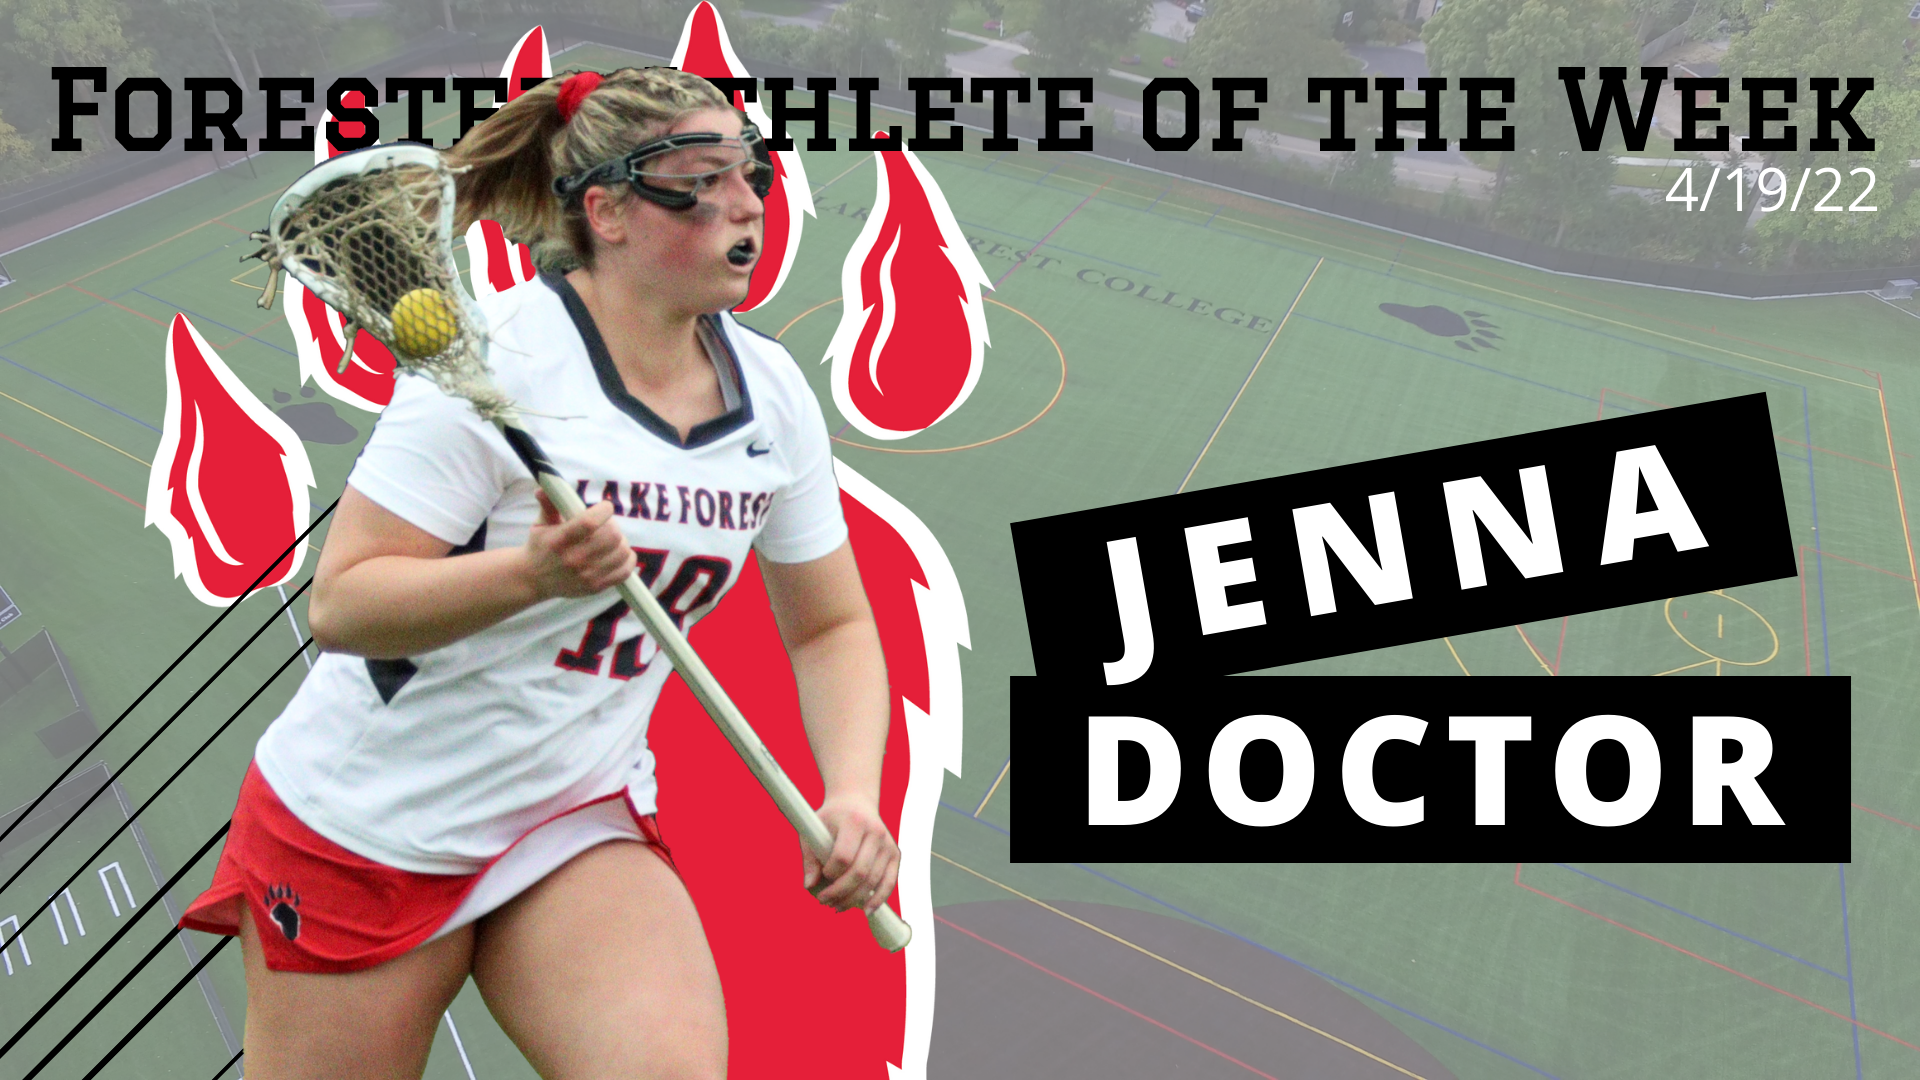 Jenna Doctor Named Women's Forester Athlete of the Week